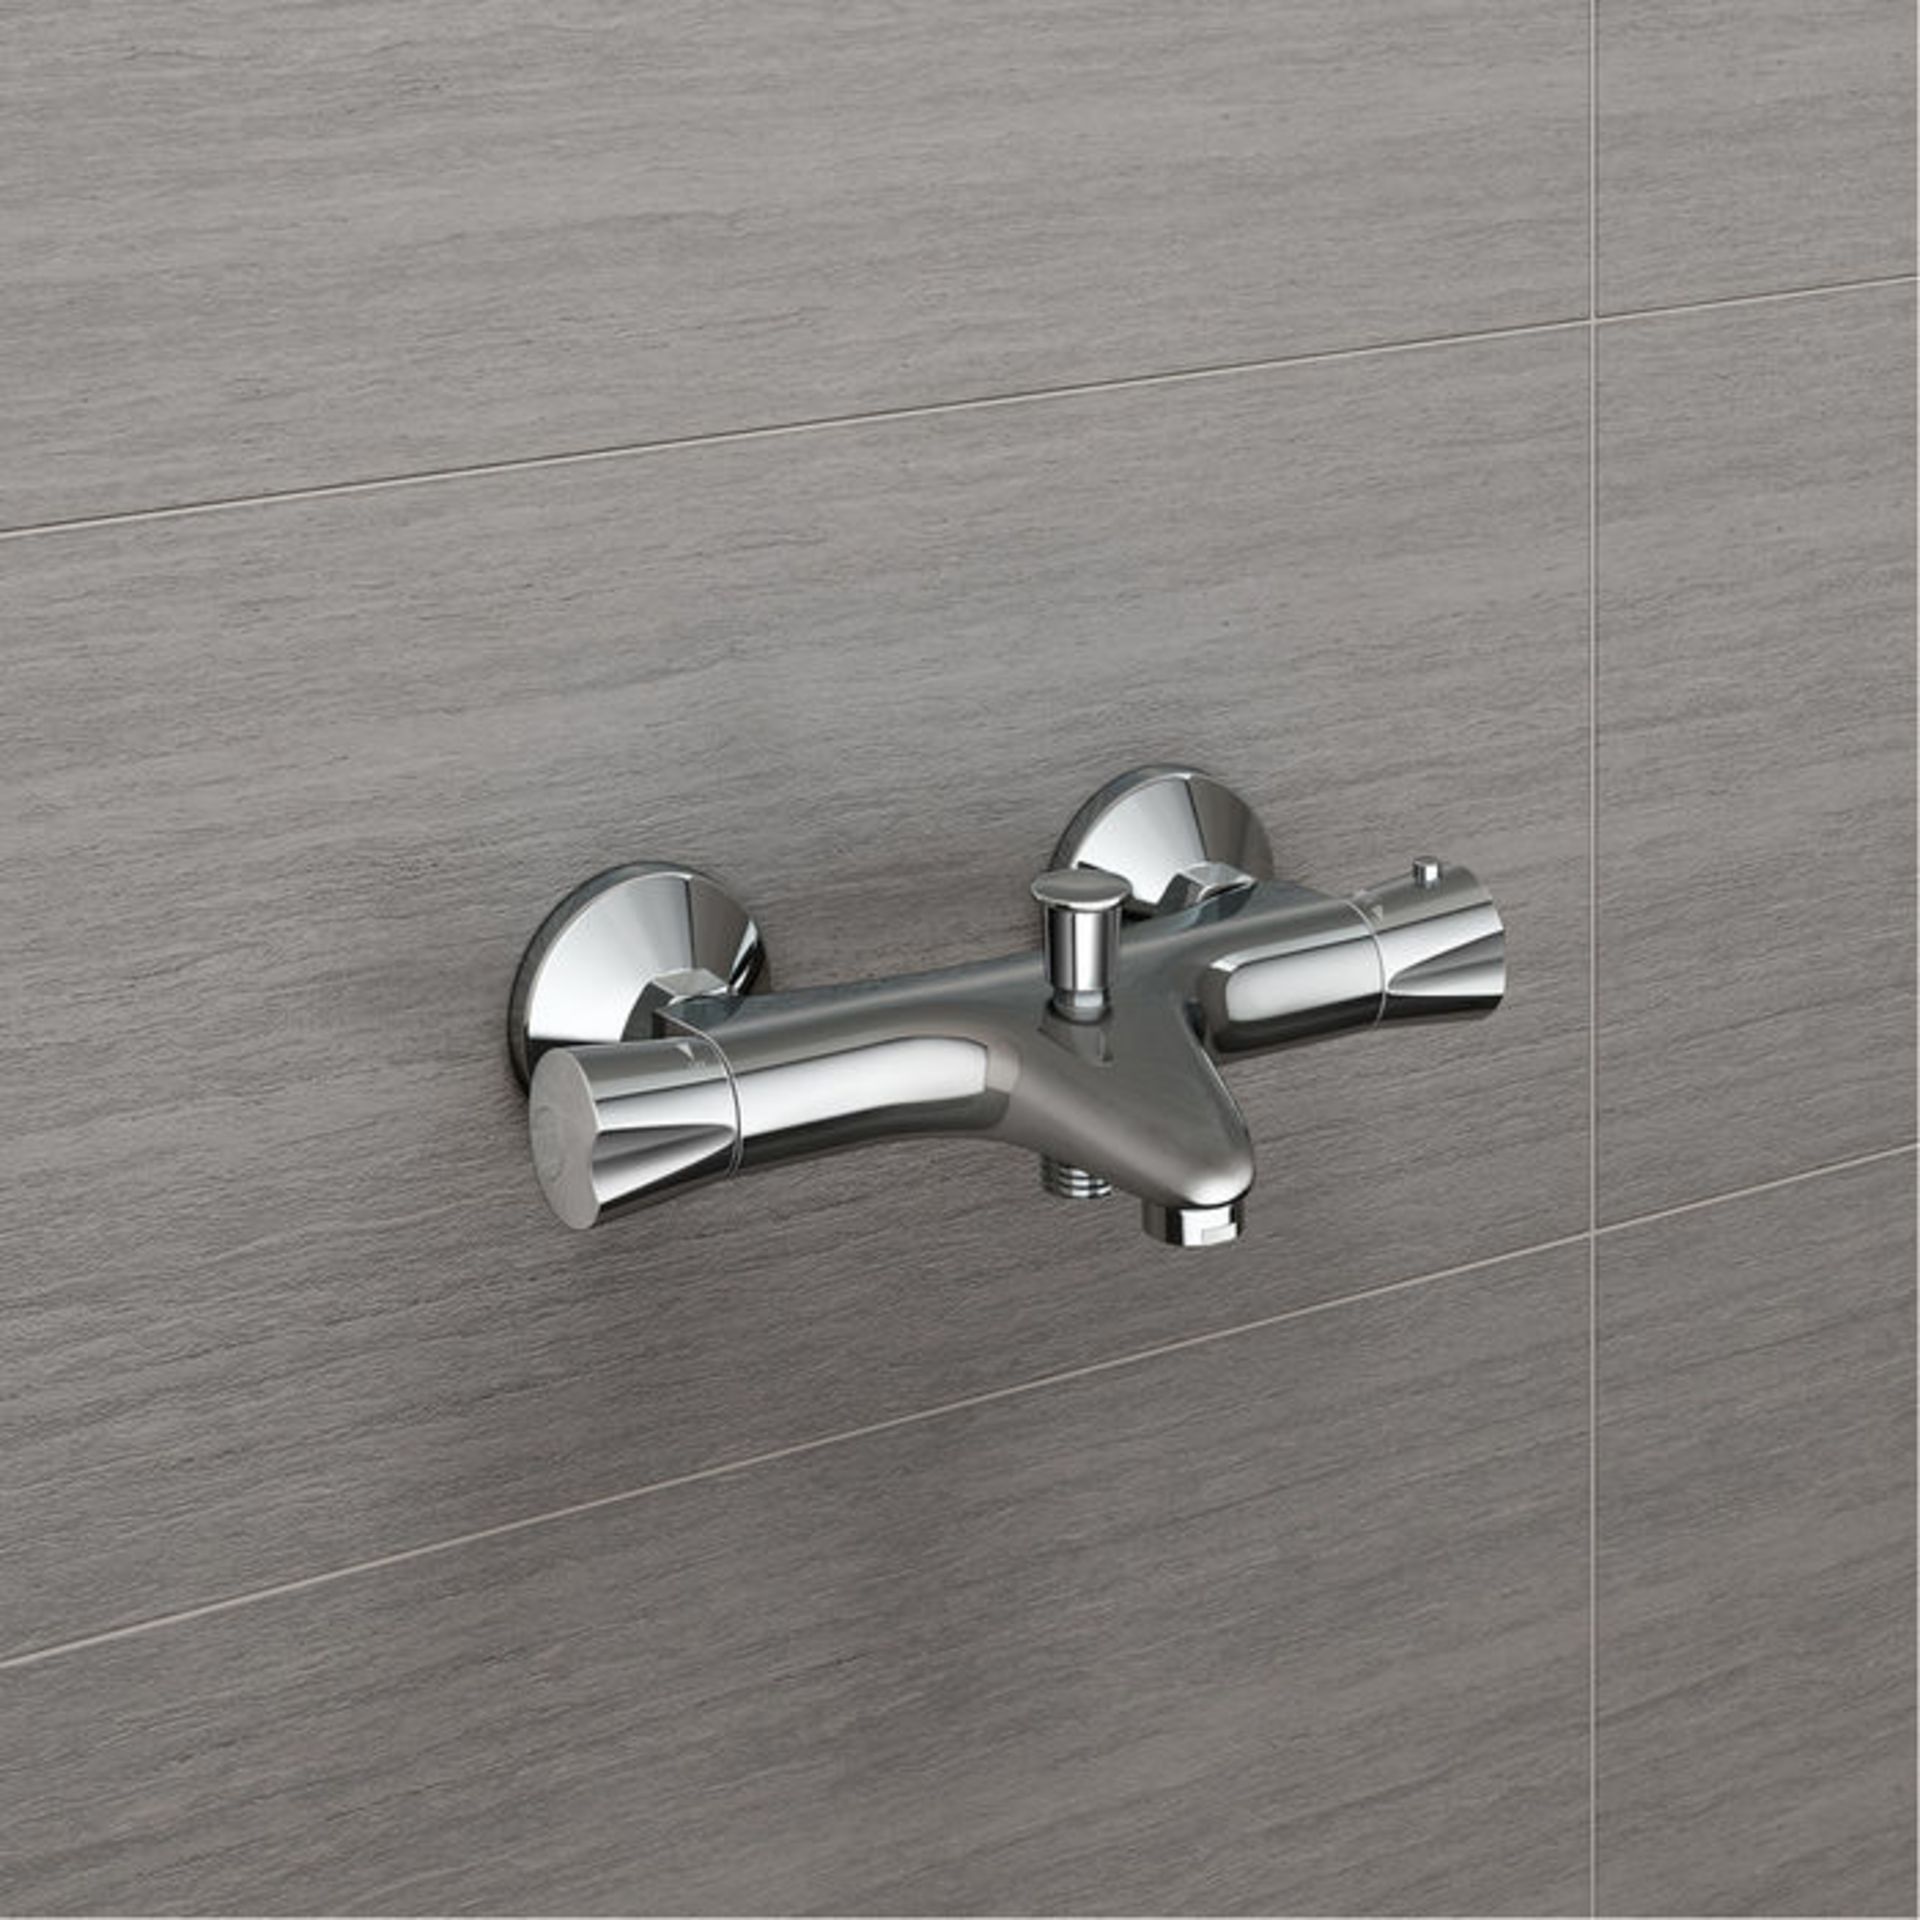 (W40) Shower Mixer Valve with Bath Filler. Chrome Plated Solid Brass Mixer Thermostatic mixer - Image 2 of 3